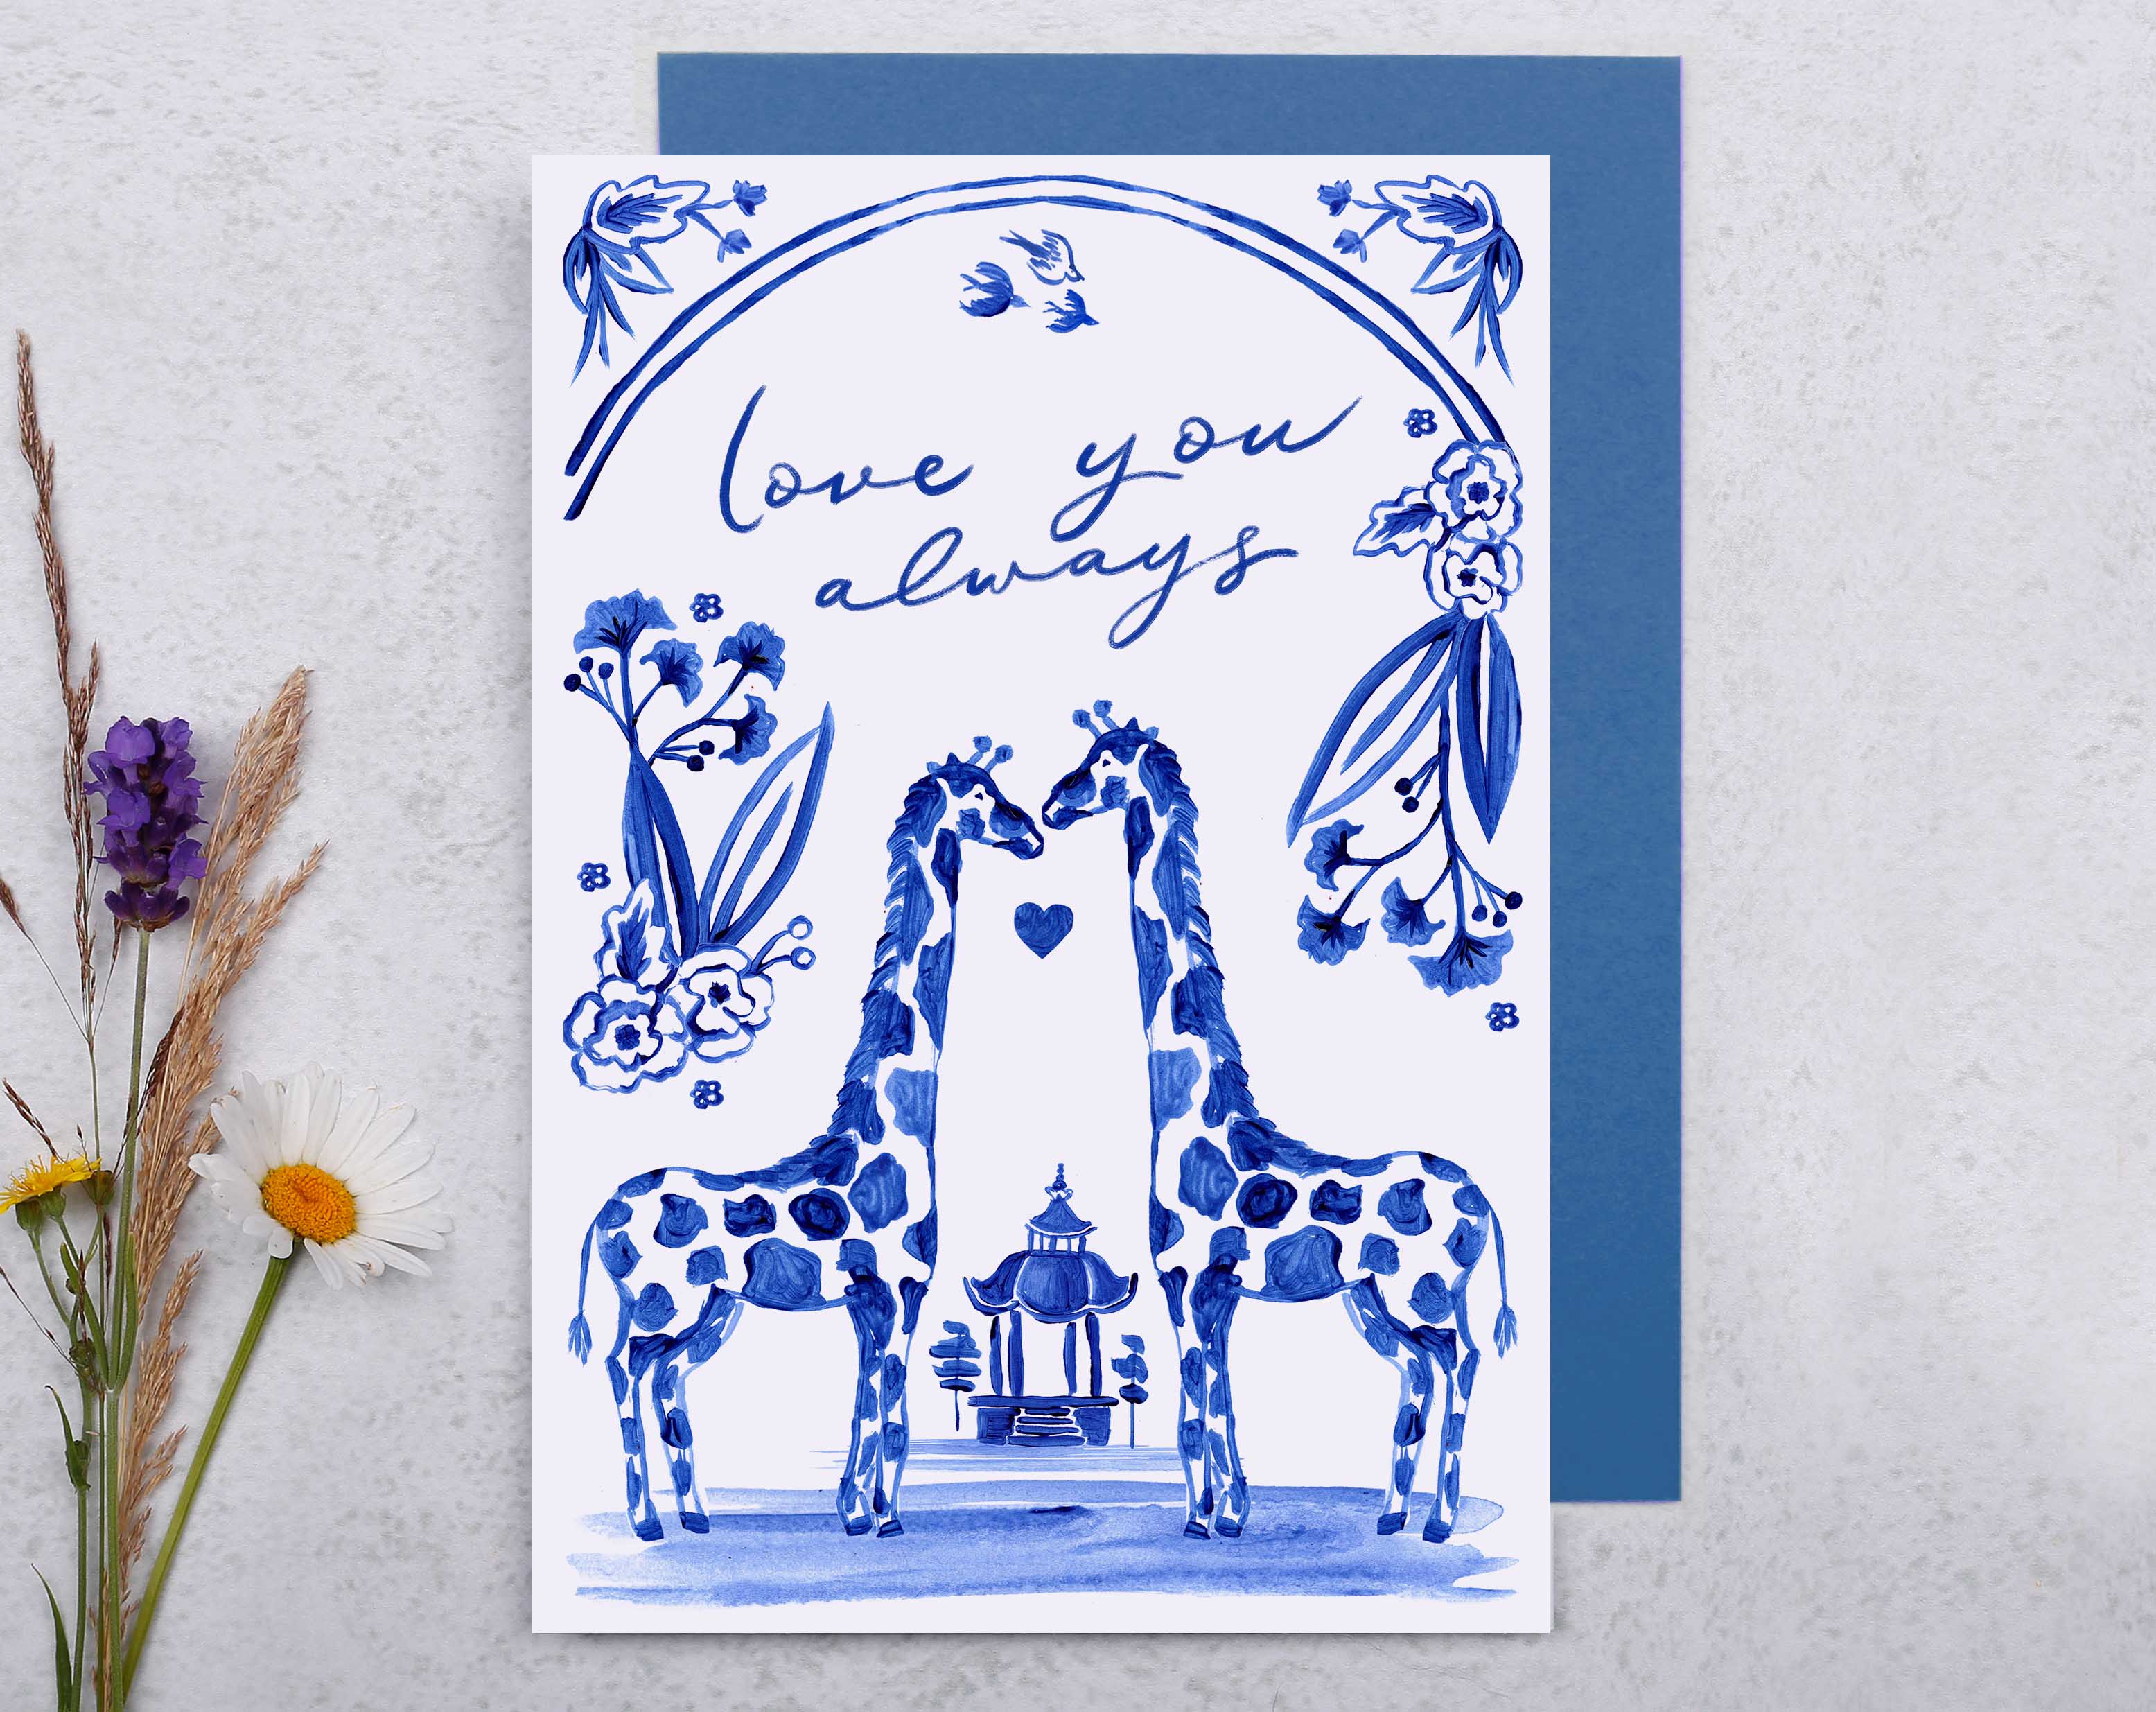 A blue porcelain inspired Anniversary Card with 2 giraffes in love, surrounded by hand painted flowers.